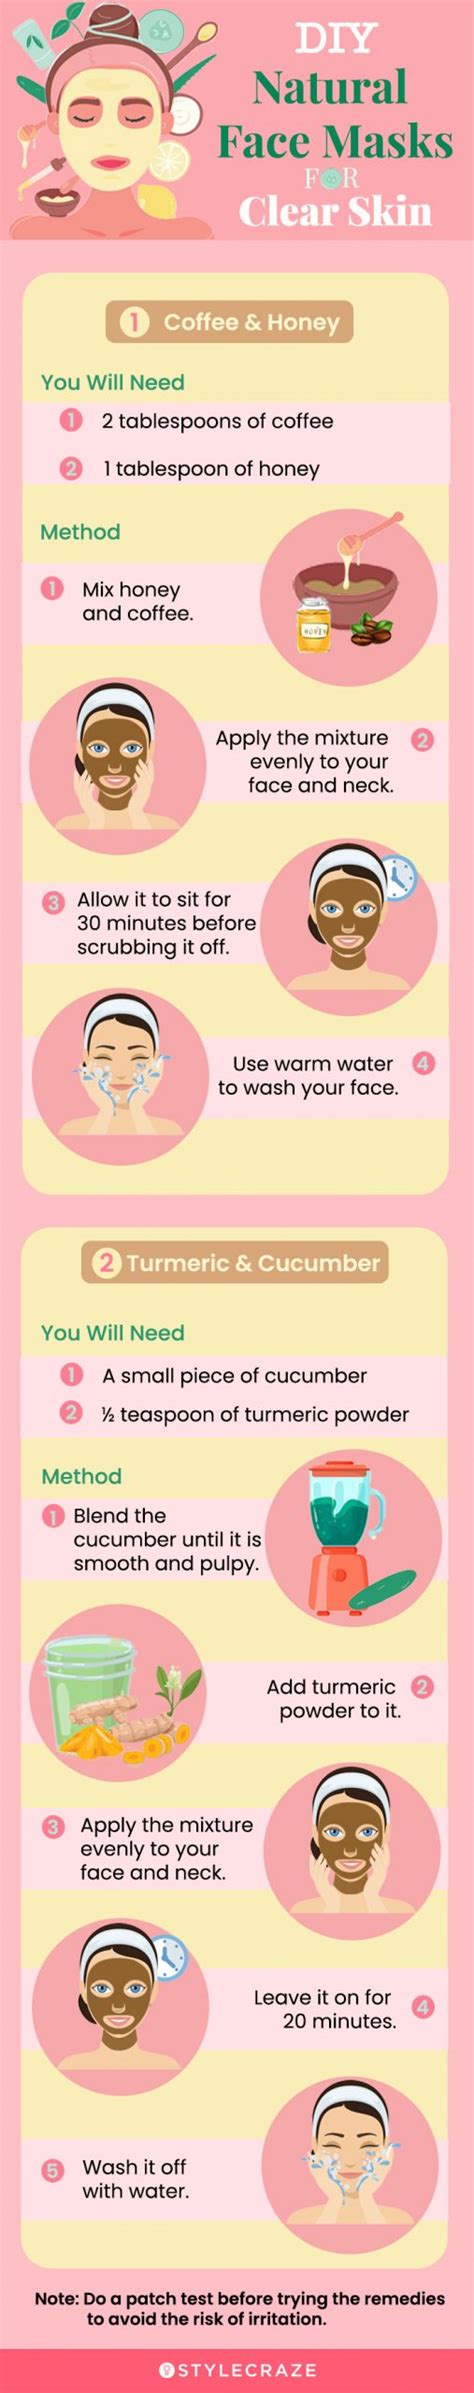 How To Get Clear Skin 14 Natural Tips For Spotless Skin